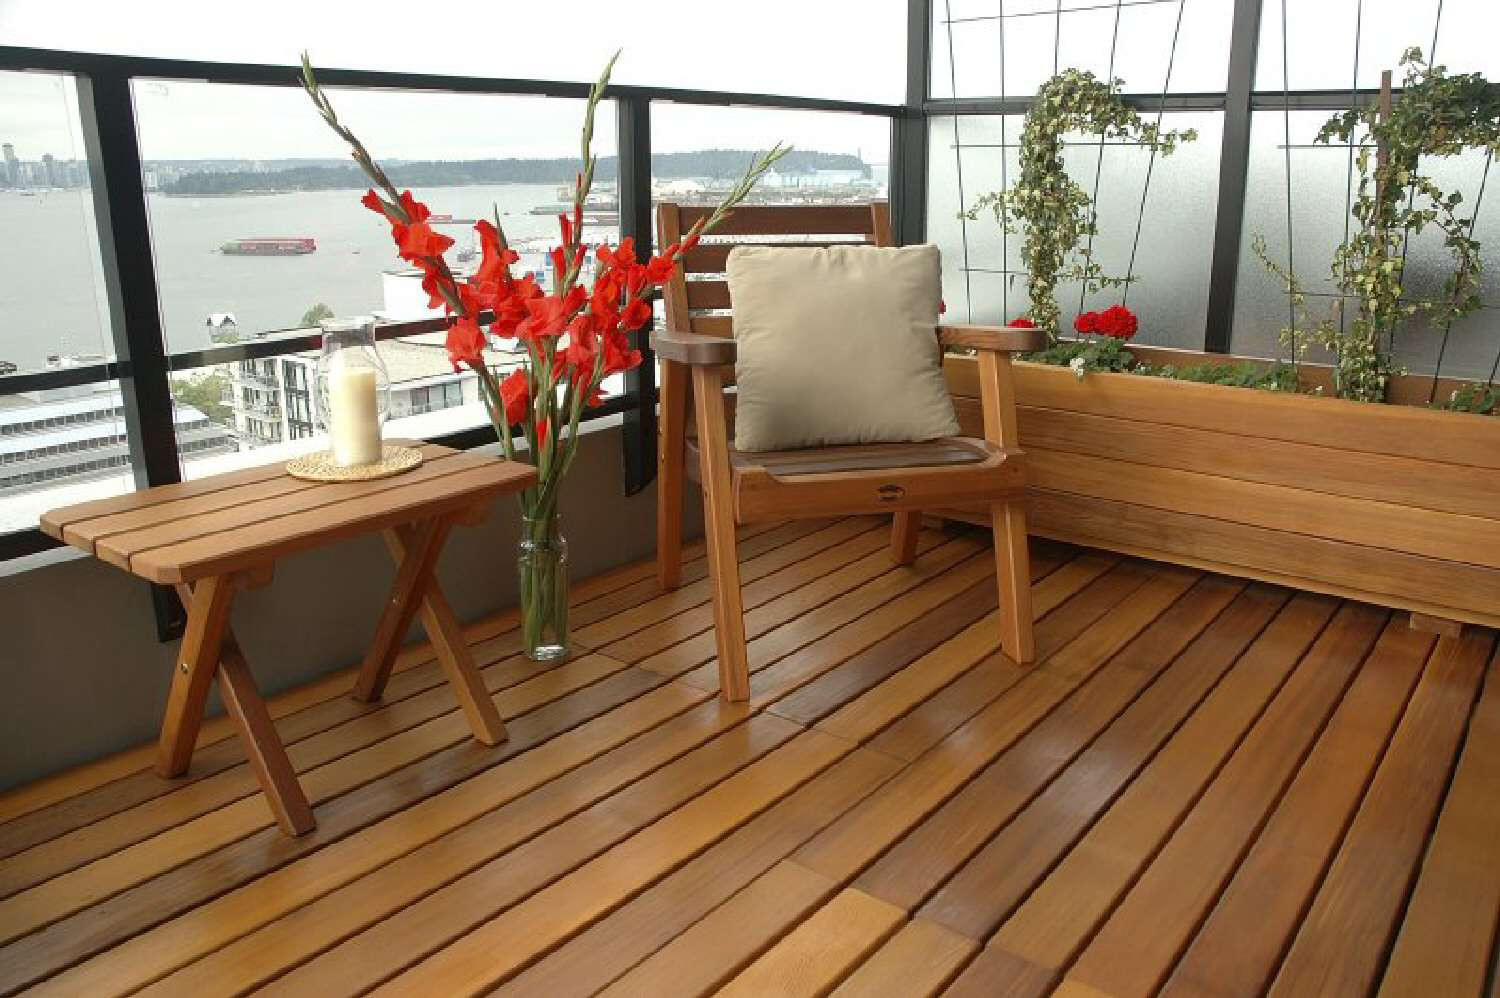 27 Lovely Pc Hardwood Floors Linden Nj 2022 free download pc hardwood floors linden nj of the best woods for decks and porches for western red cedar decking with matching table and chair